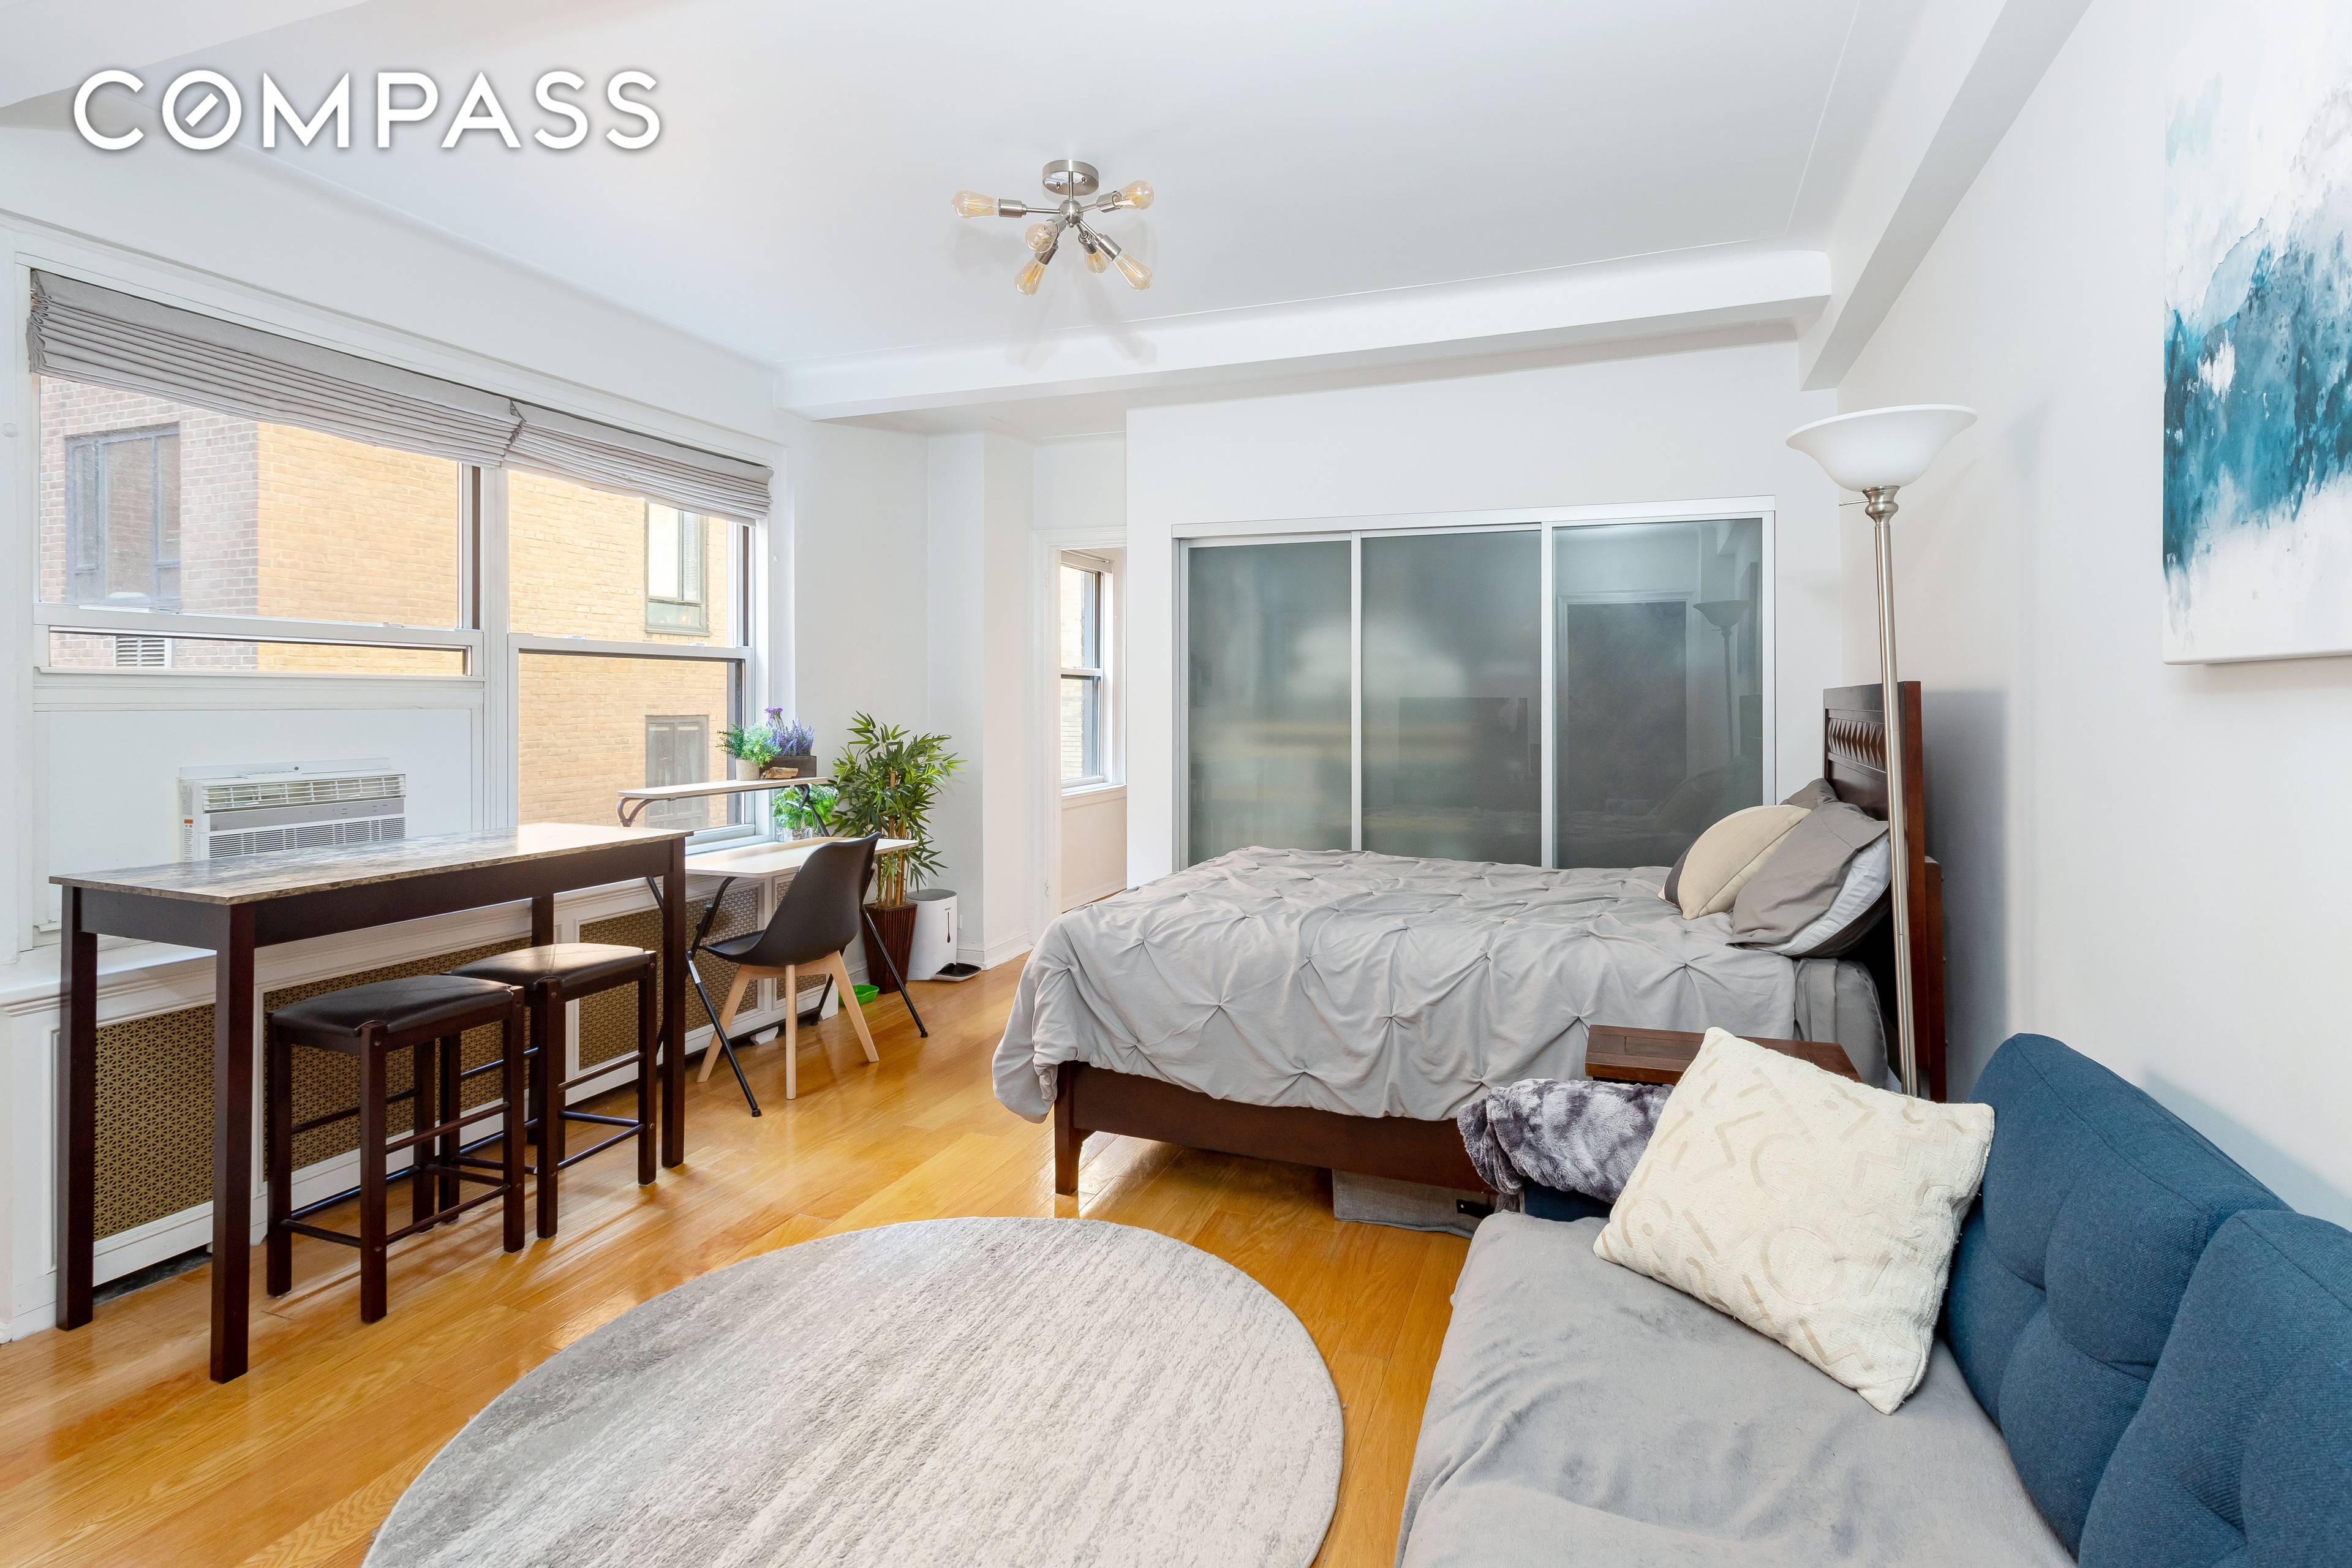 Brooklyn at its best. A gorgeous studio apartment just became available for sale in the beautiful Brooklyn Heights neighborhood.